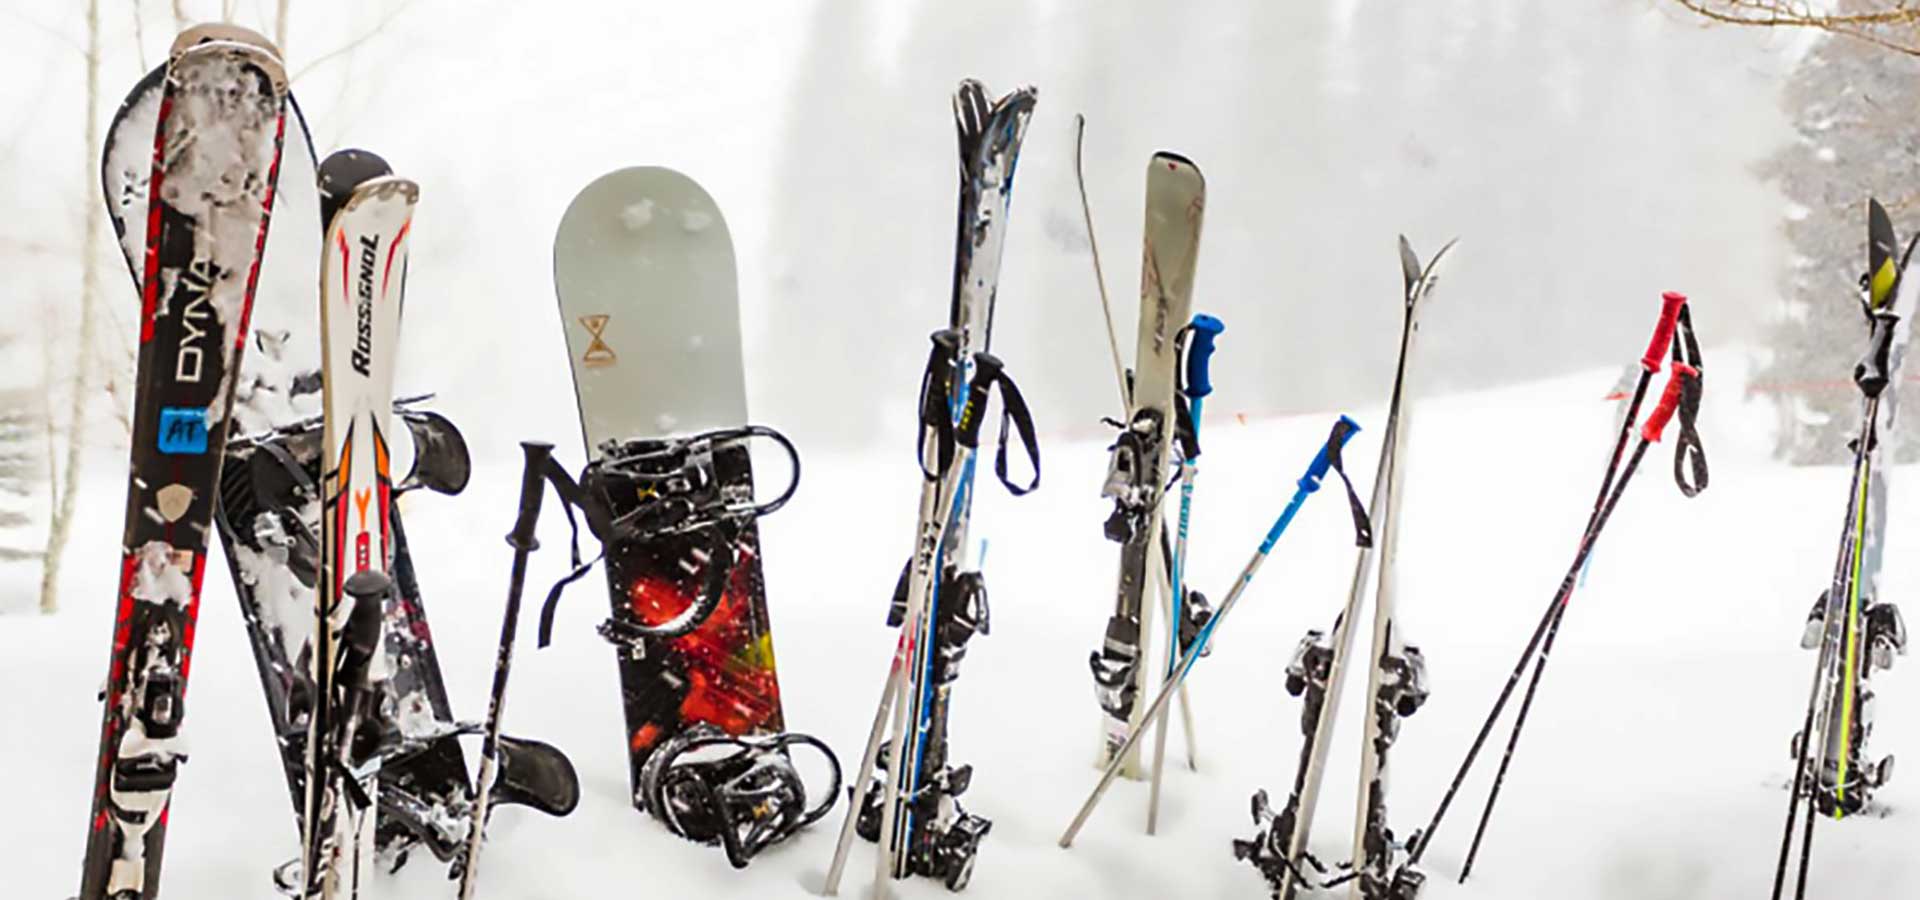 Snowboards and skis in the snow